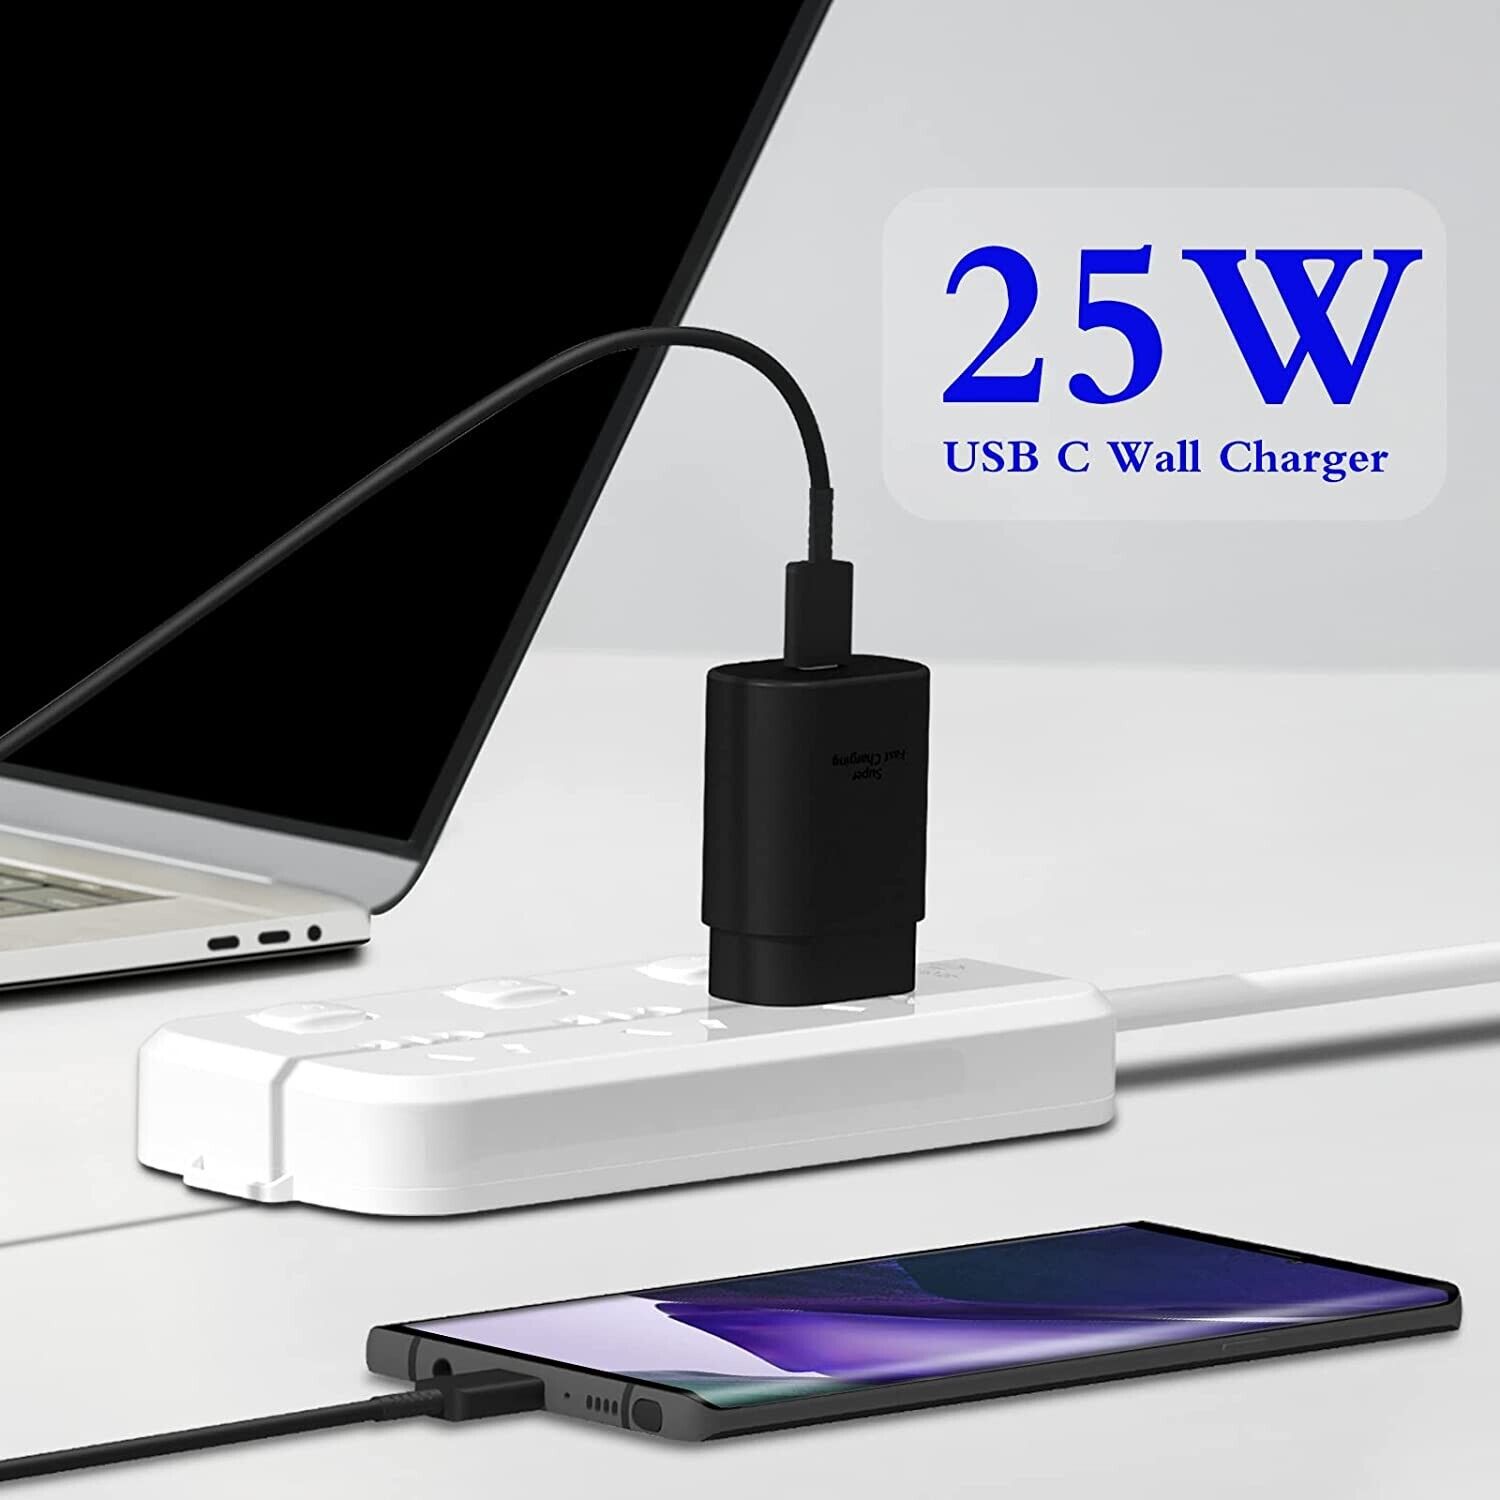 2x GENUINE 25 Watt SUPER Fast Wall Charger & USB-C Cable For Samsung S23 S22 S21 TCoology Quick Charge Rapid Charging, Galaxy S21 S21+ Ultra Plus 5G FE, Galaxy Note 10 10+ Ultra Plus 5G, Galaxy Note 20 20+ Ultra Plus 5G, Galaxy S20 S20+ Ultra 5G Ultra, LG V30 40 50 60 Stylo 4 5 6, Power Delivery PD, Galaxy A20 A21 A22 A50 A51 A52, LG V30 V40 V50 V60 Stylo 4 5 6, Galaxy Tab S3 S4 S5 S6 S7 Pro, Extra Long Charger Cord Wire Plug, Galaxy A70 A71 A32 S10 S10+ Plus, Galaxy S10e/S9/S9+/S8/S8+ Plus, 2020 2018 iPad Pro 11/12.9, Motorola Moto Edge Plus One Zoom, Moto G 5G Plus Hyper One Vision G8 G9, Galaxy A90 A91 A92 A72 S8 S9 Plus, Galaxy Note 8 9 Tab S8 Pro - фотография #3